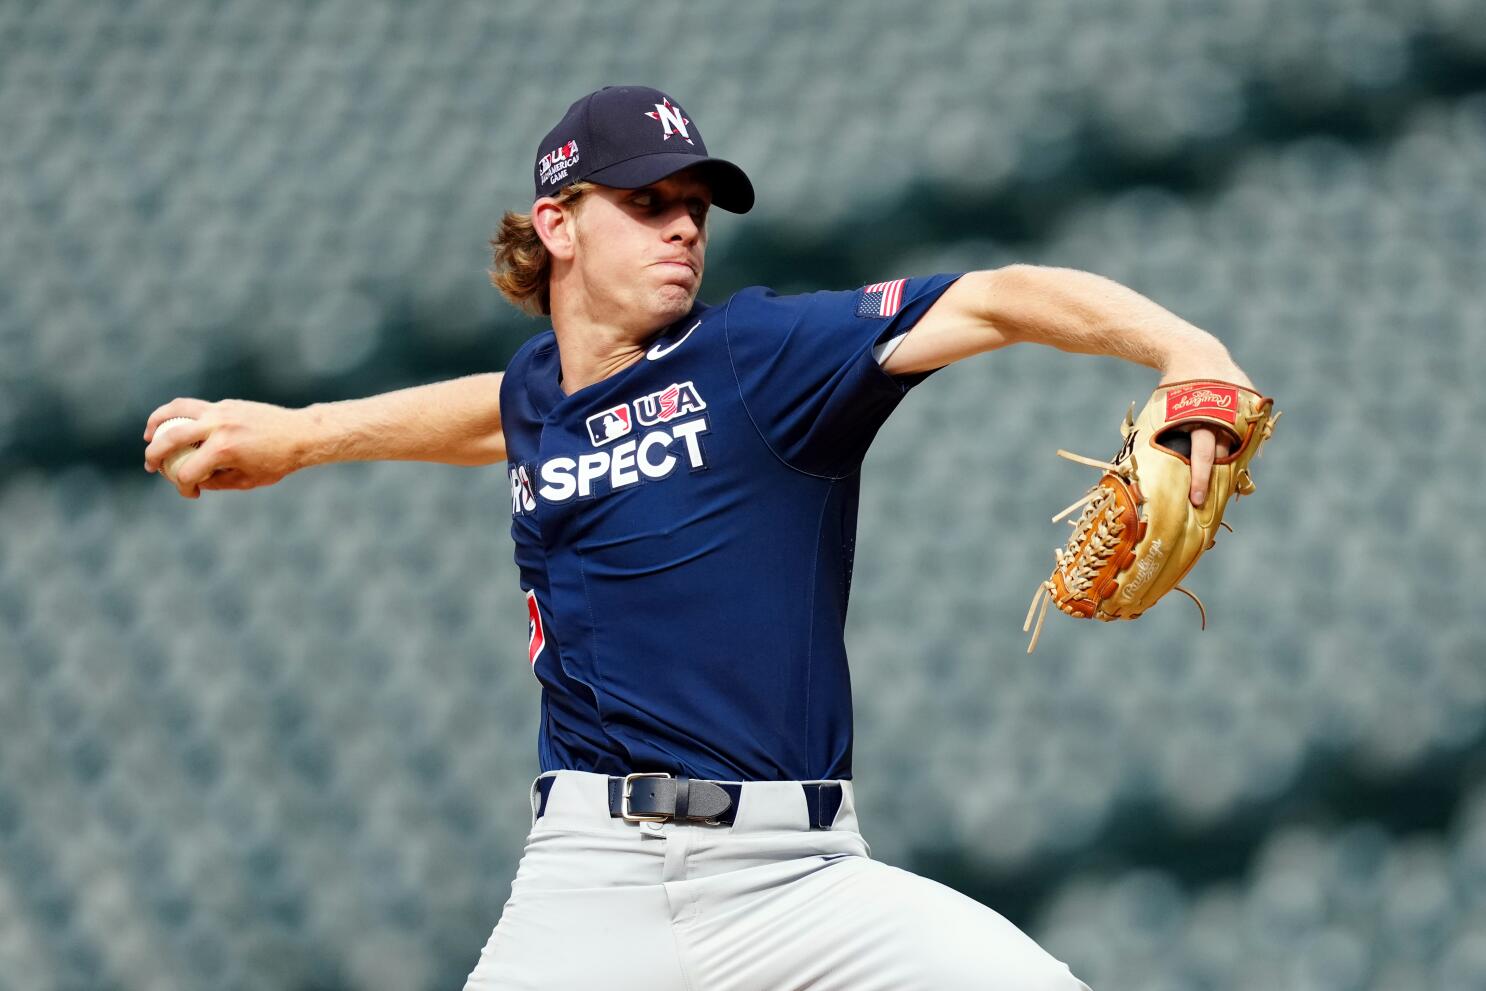 Padres draft LHP Snelling No. 39, 07/18/2022